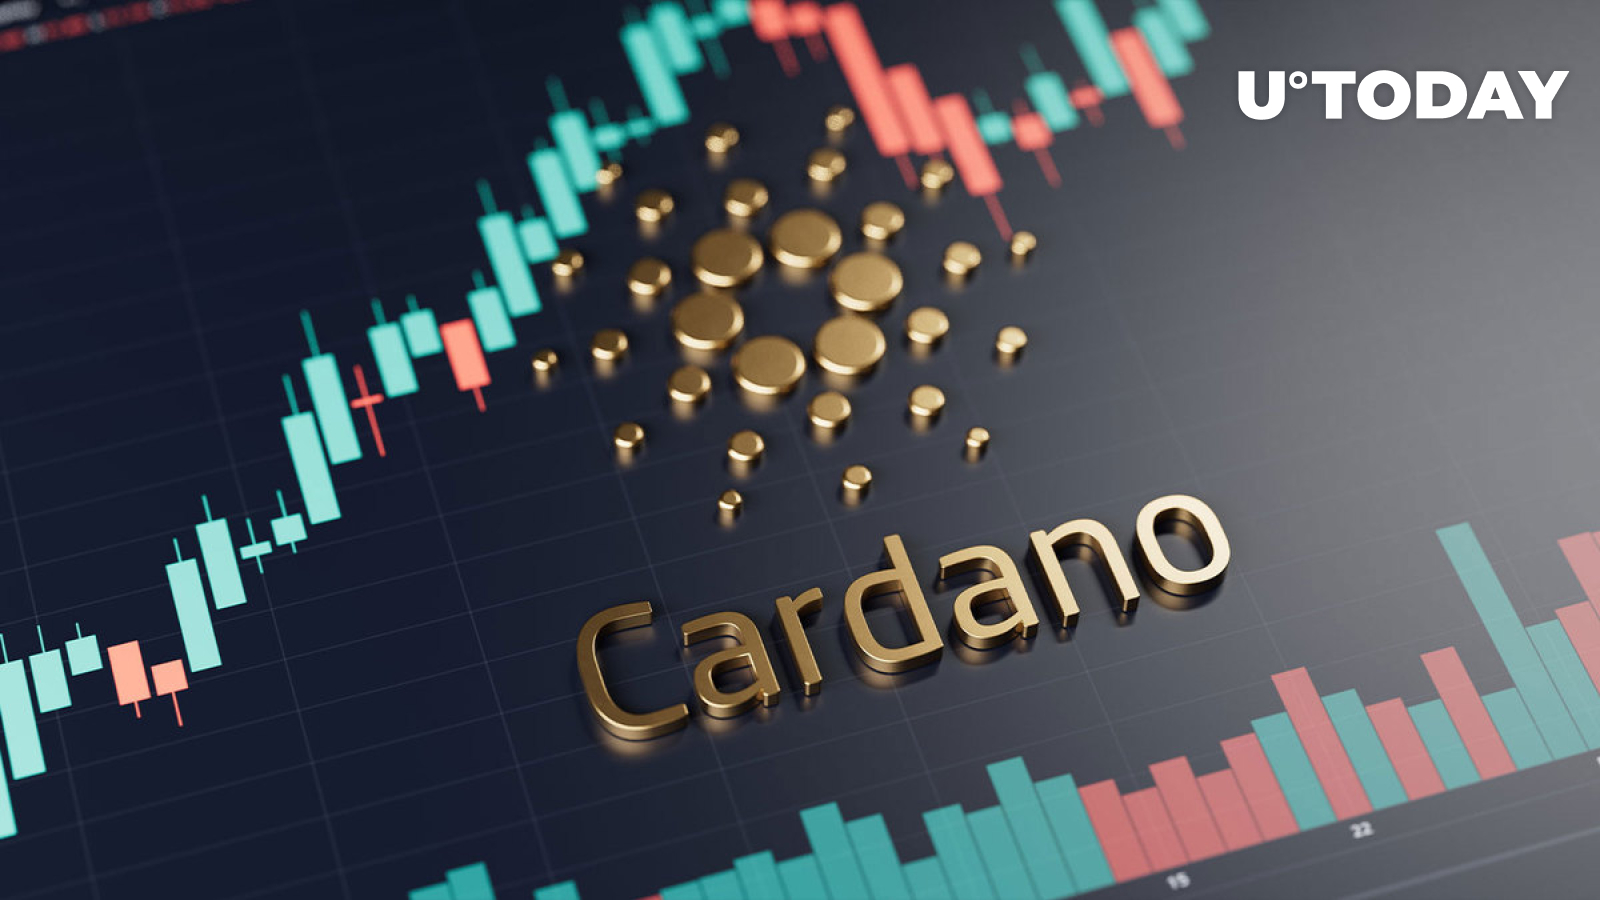 Cardano (ADA) 4-Month Holdings Are on Move, Here's Who's Cashing Out - BitcoinEthereumNews.com